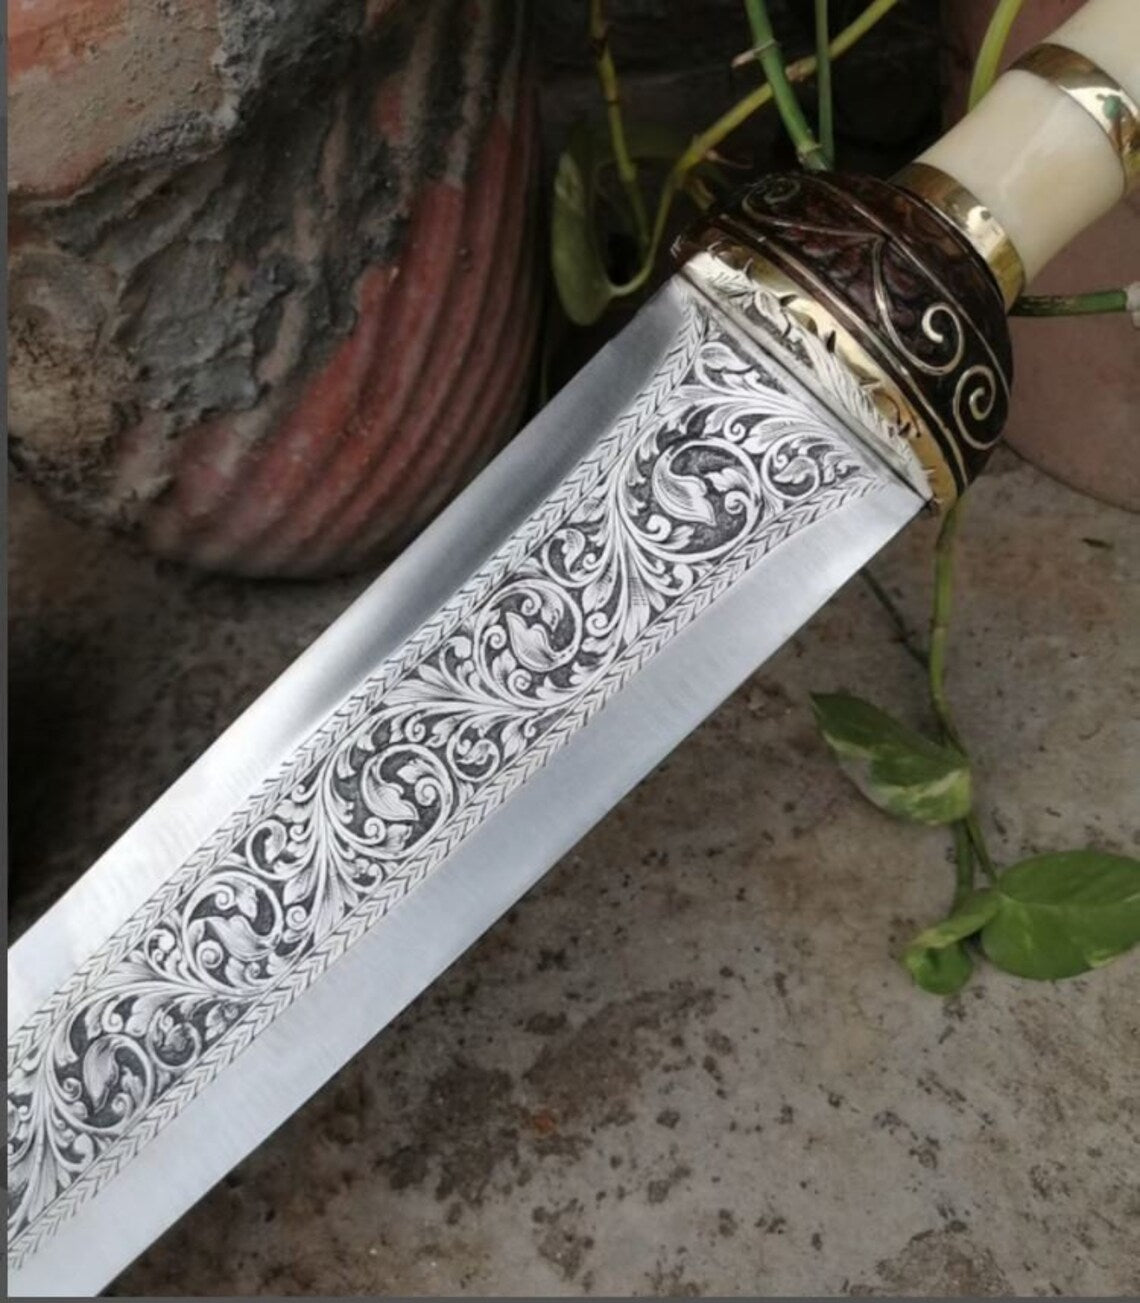 Awesome Precious Handmade Engraved Chisel, Hand Engraved Roman Gladius forged Sword, D2 Steel Carbon Steel, Free Leather Sheath